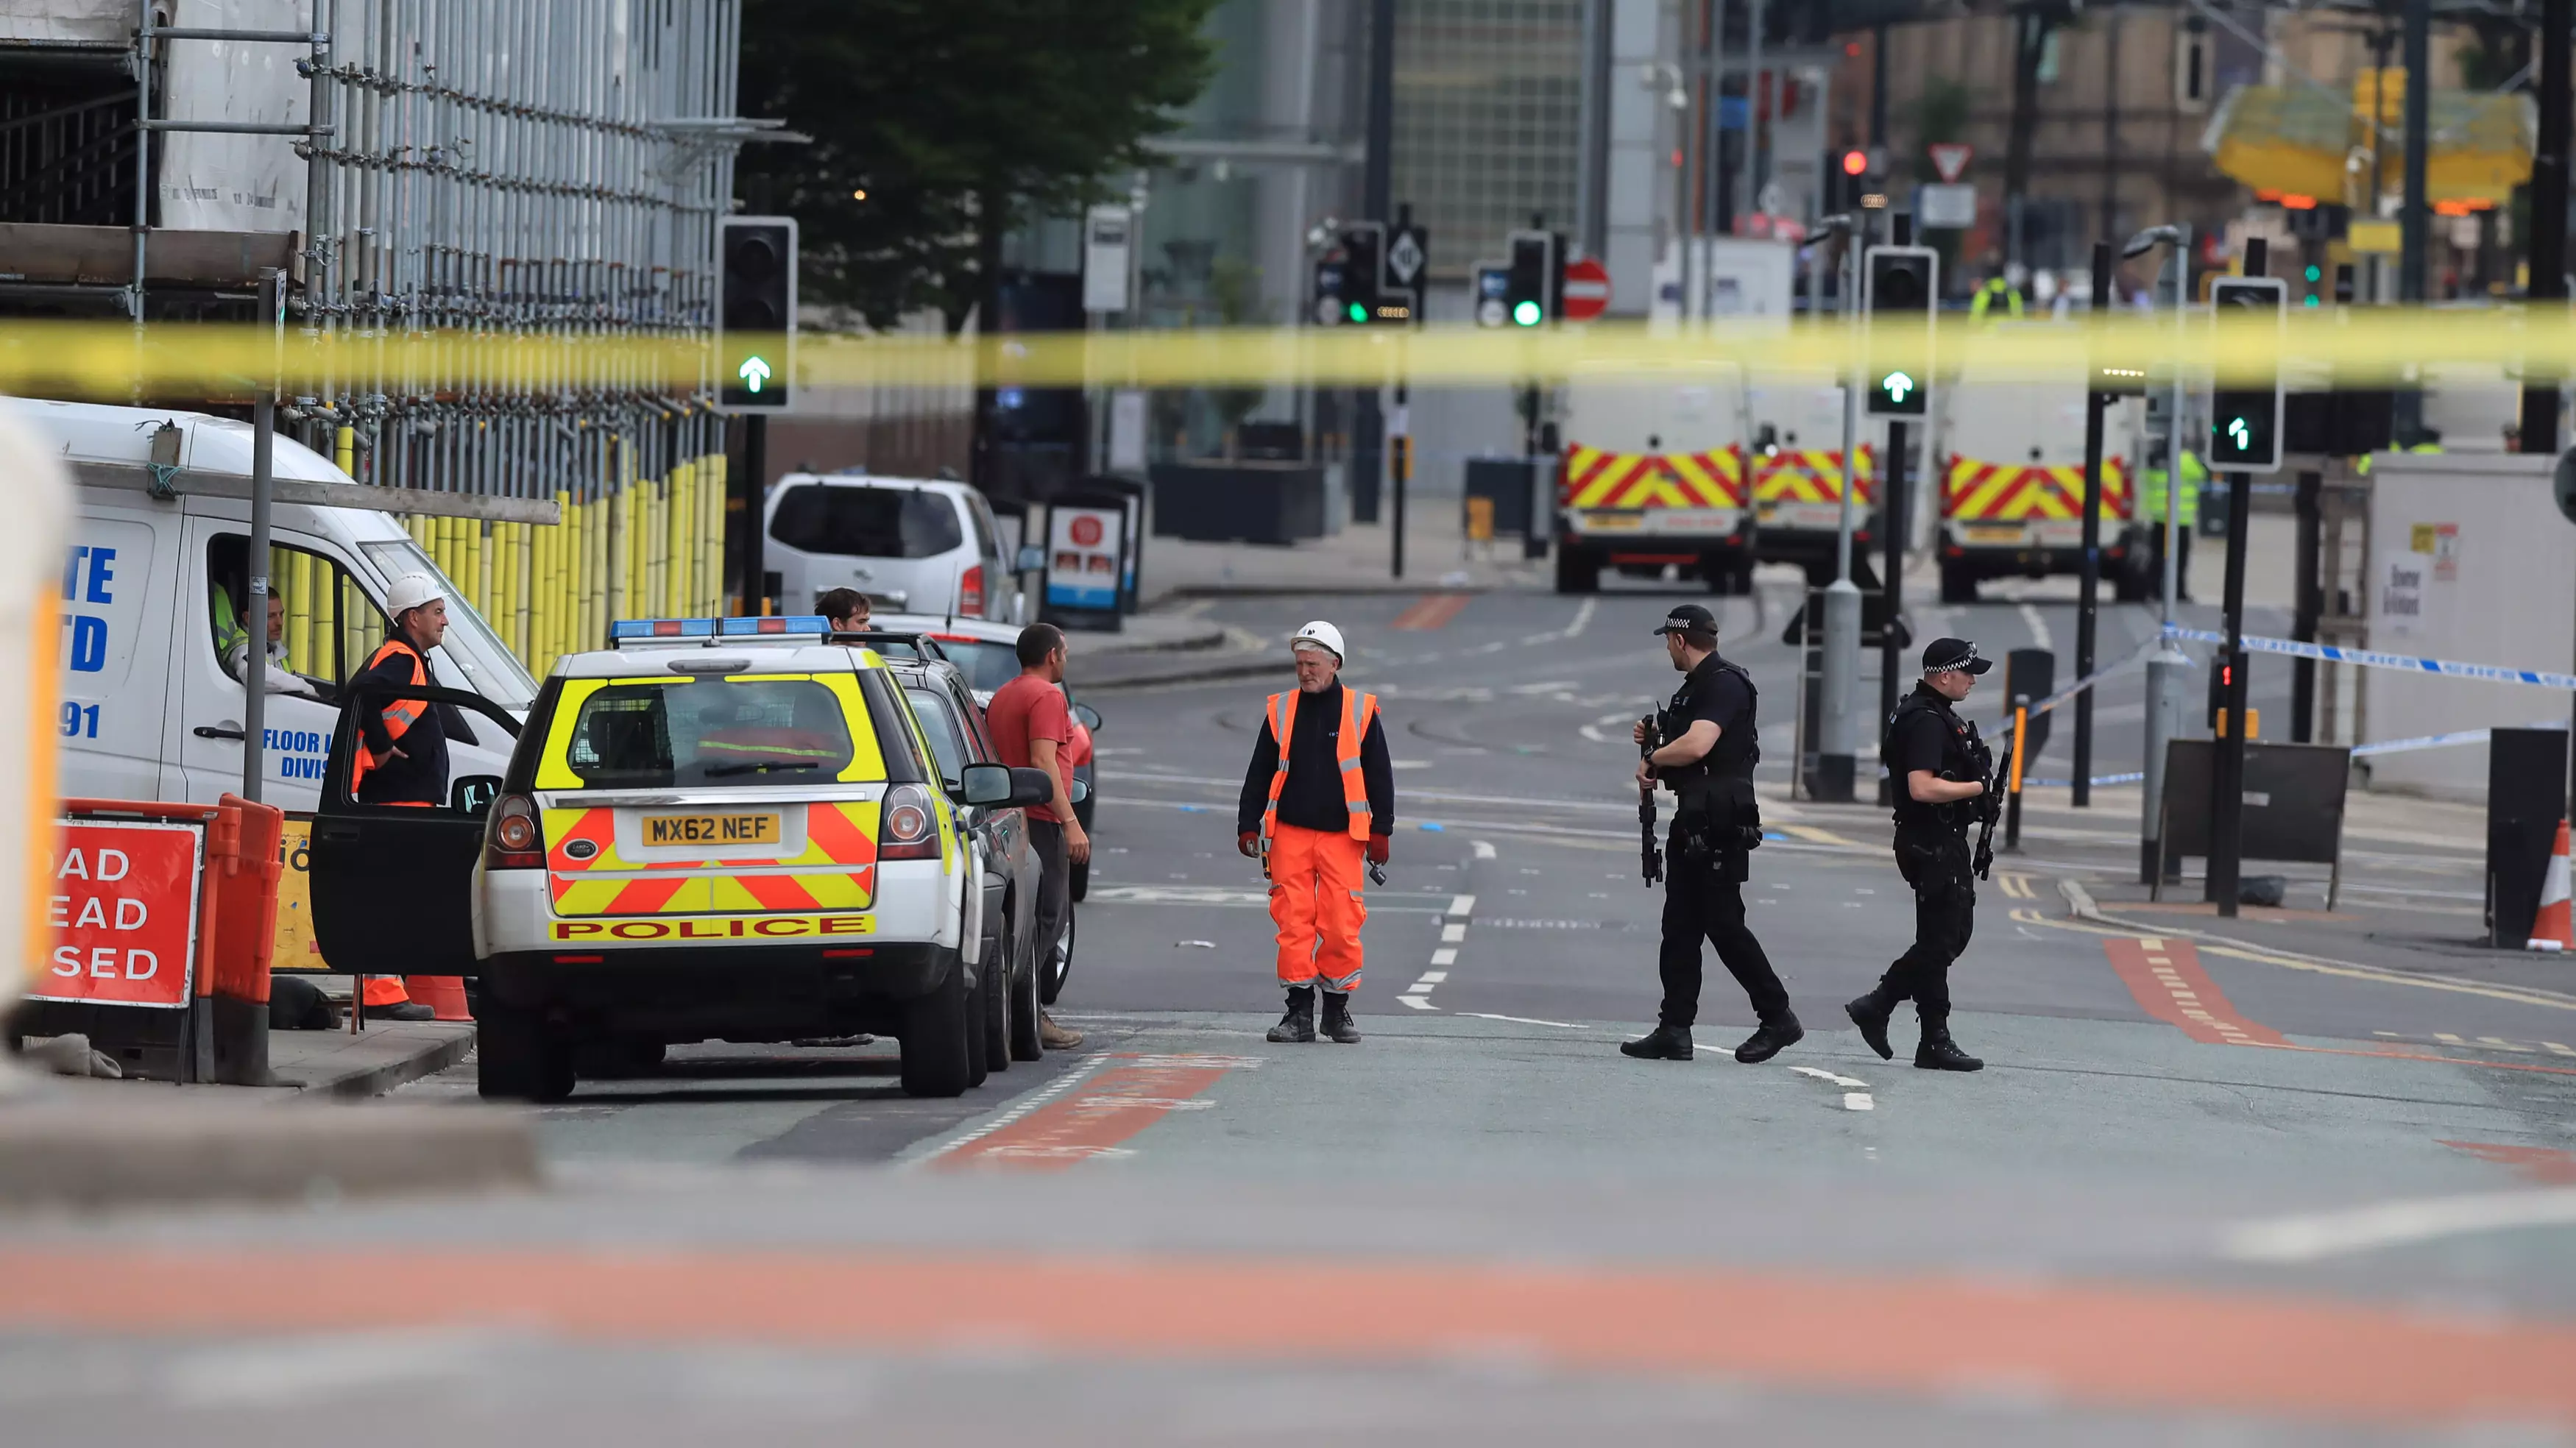 Armed Soldiers Are On British Streets Following Manchester Attack